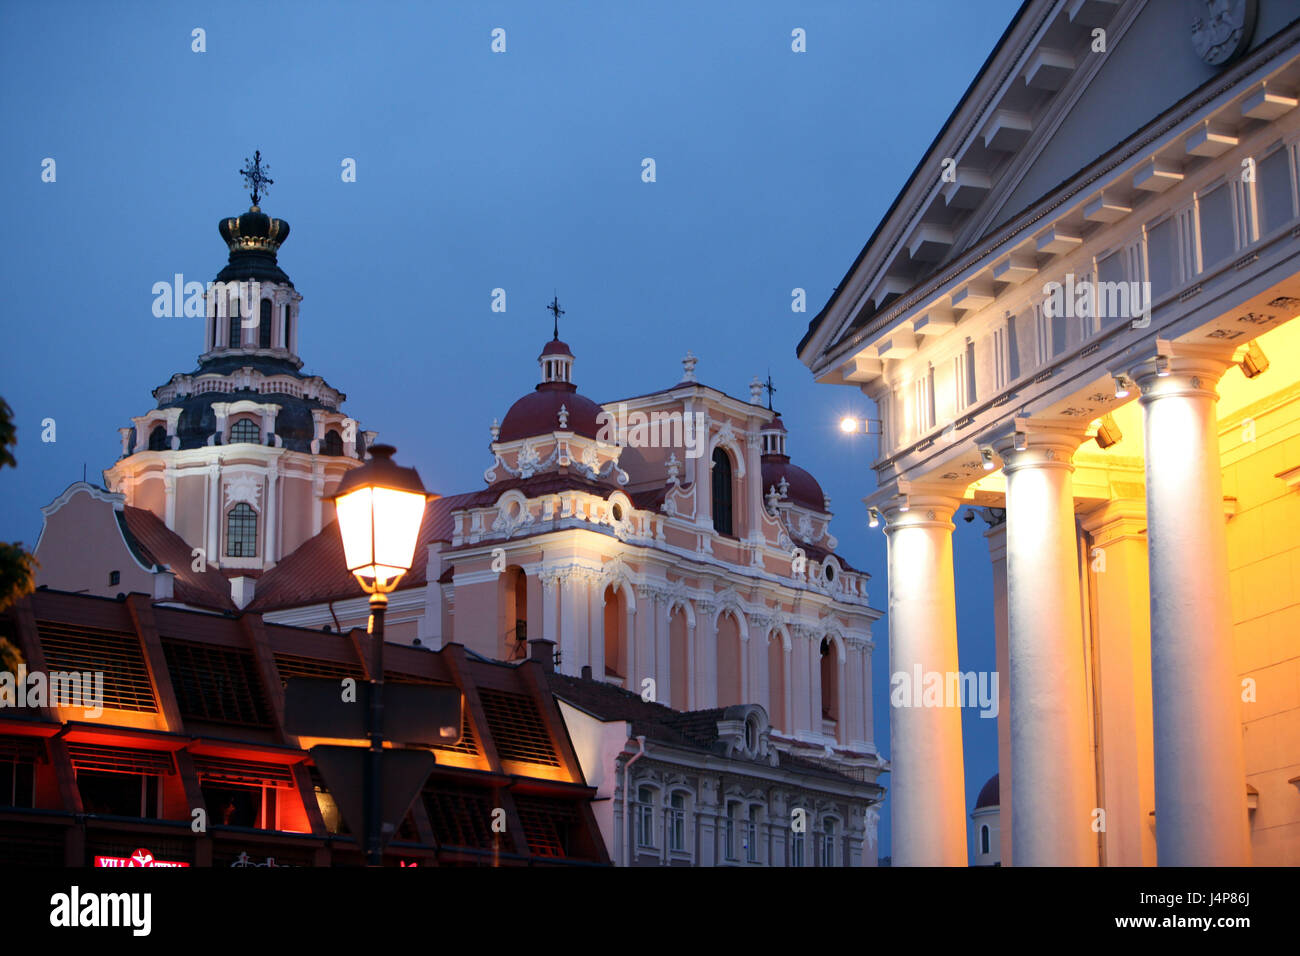 Lithuania, Vilnius, Old Town, historical city hall, St. of Kazimir church, detail, evening, Stock Photo